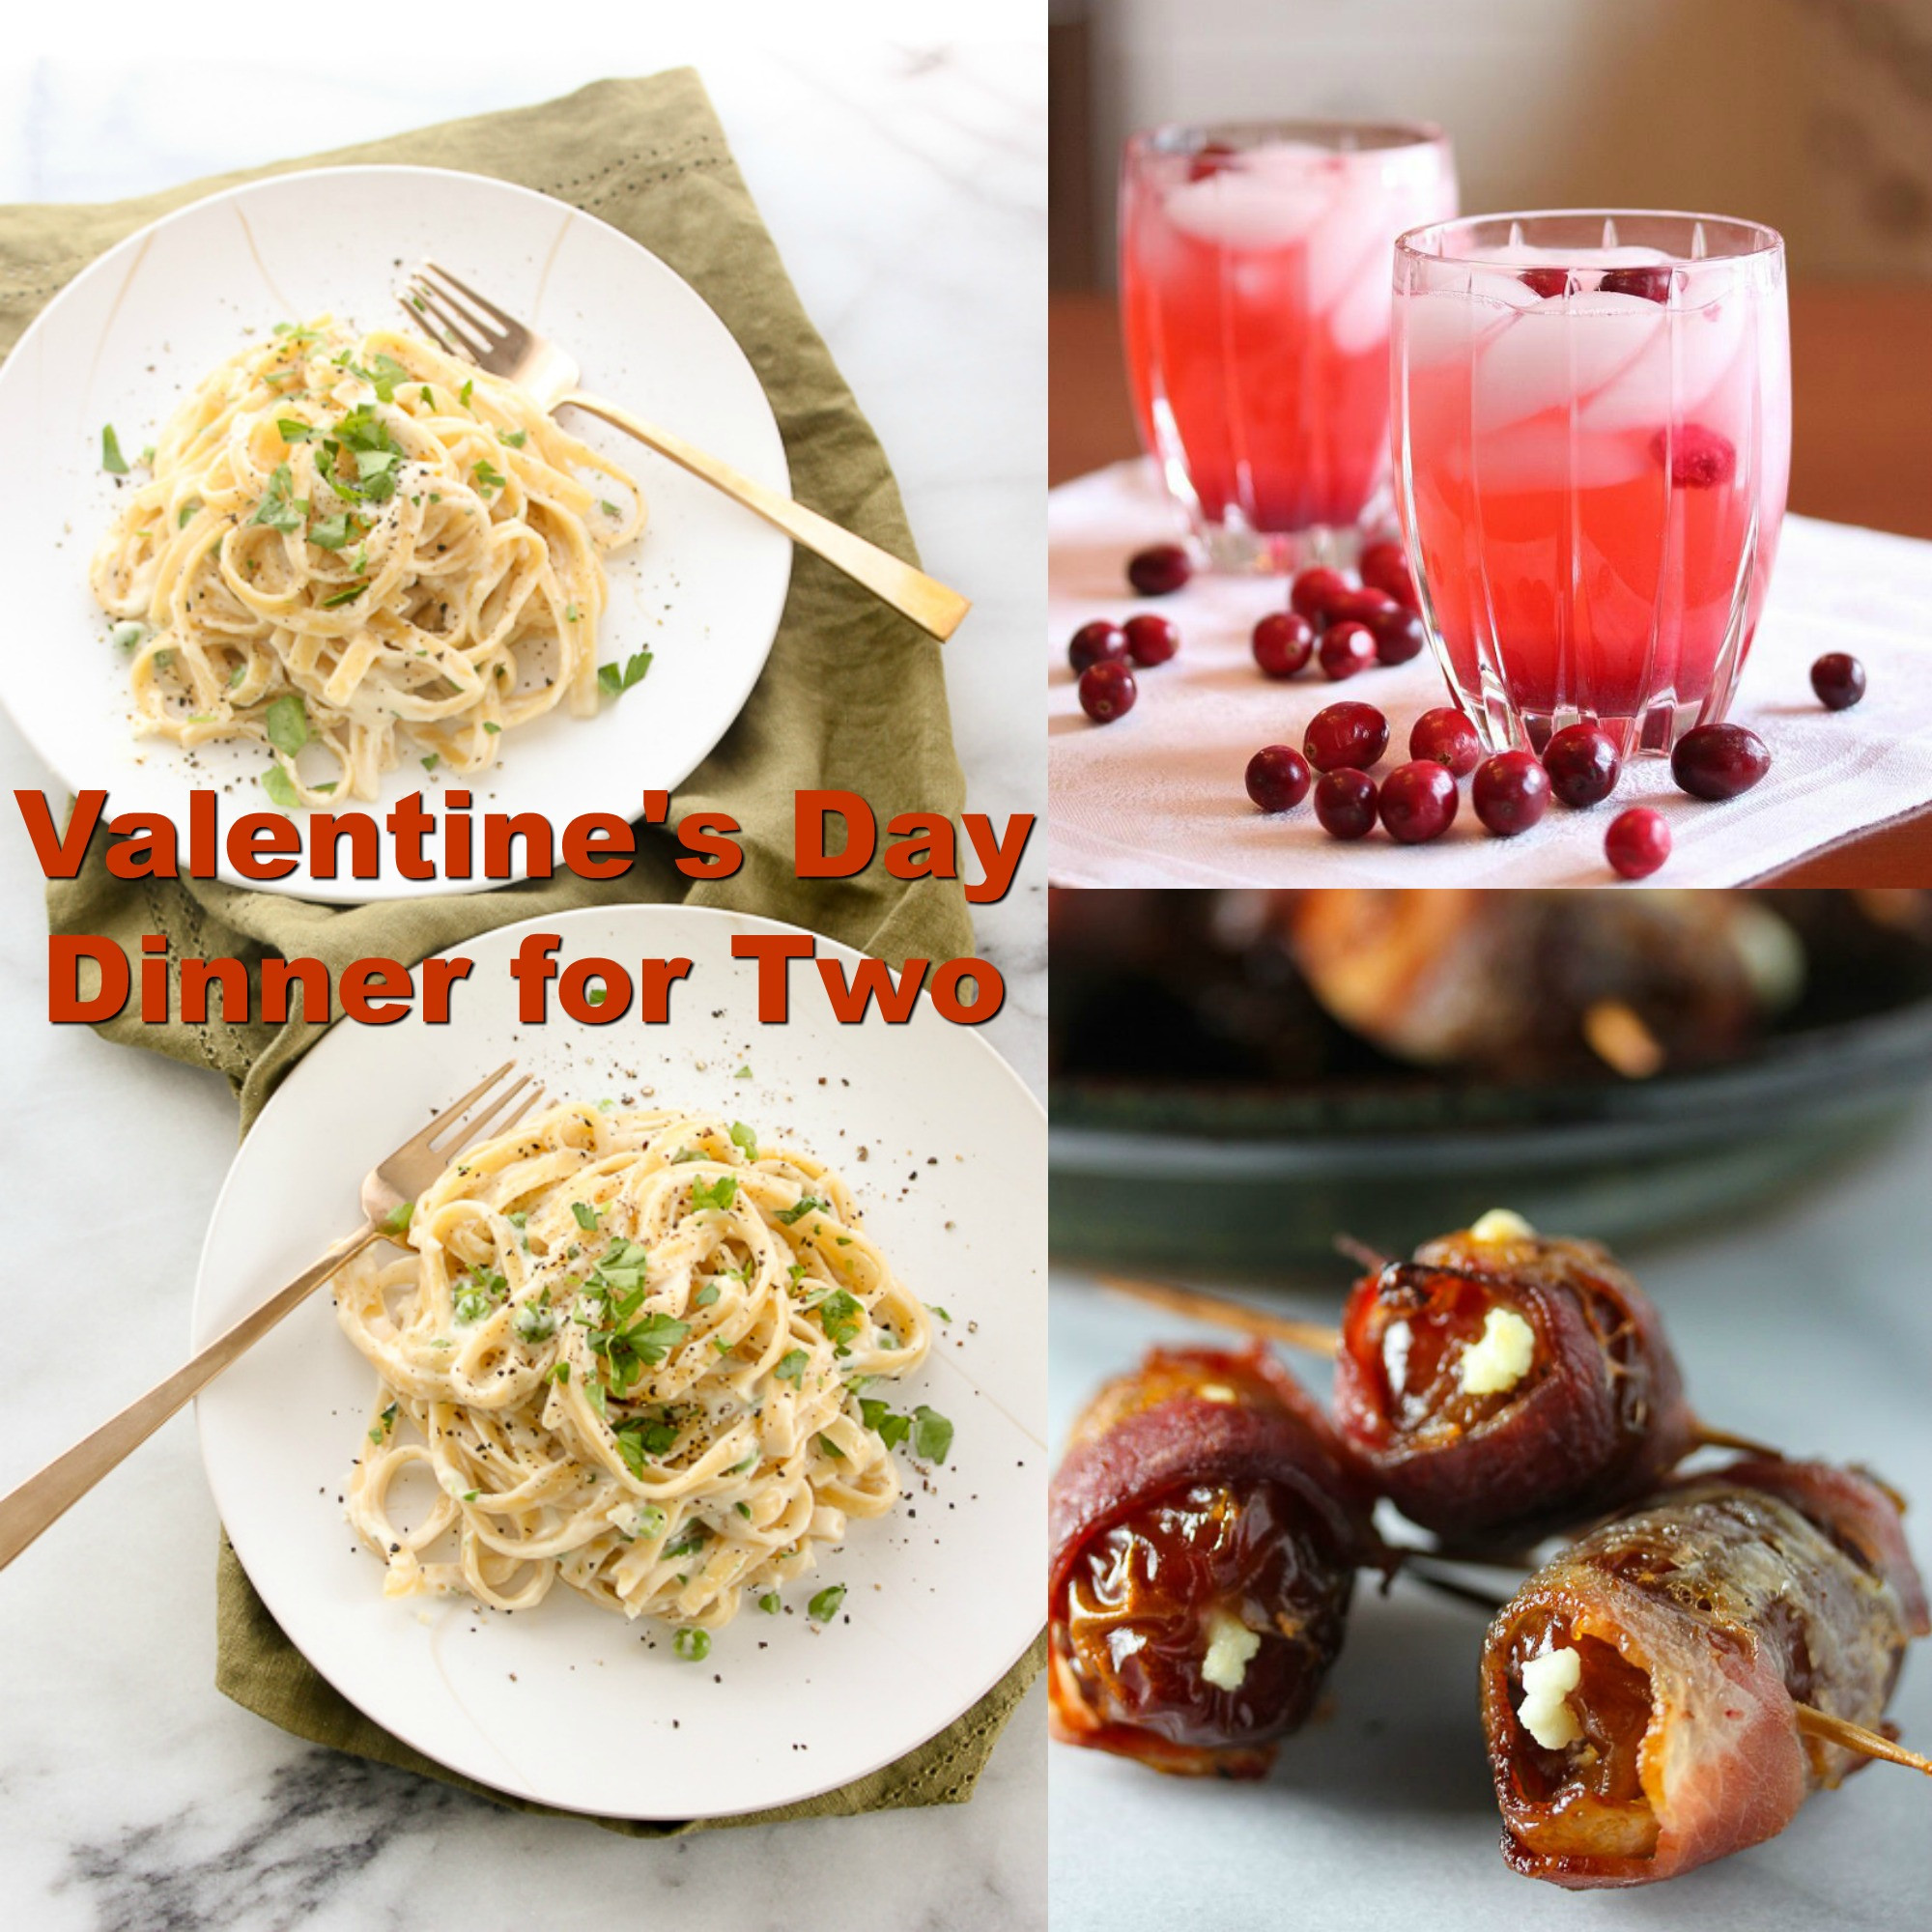 Valentines Day Romantic Dinner Ideas
 Valentine s Day Dinner for Two